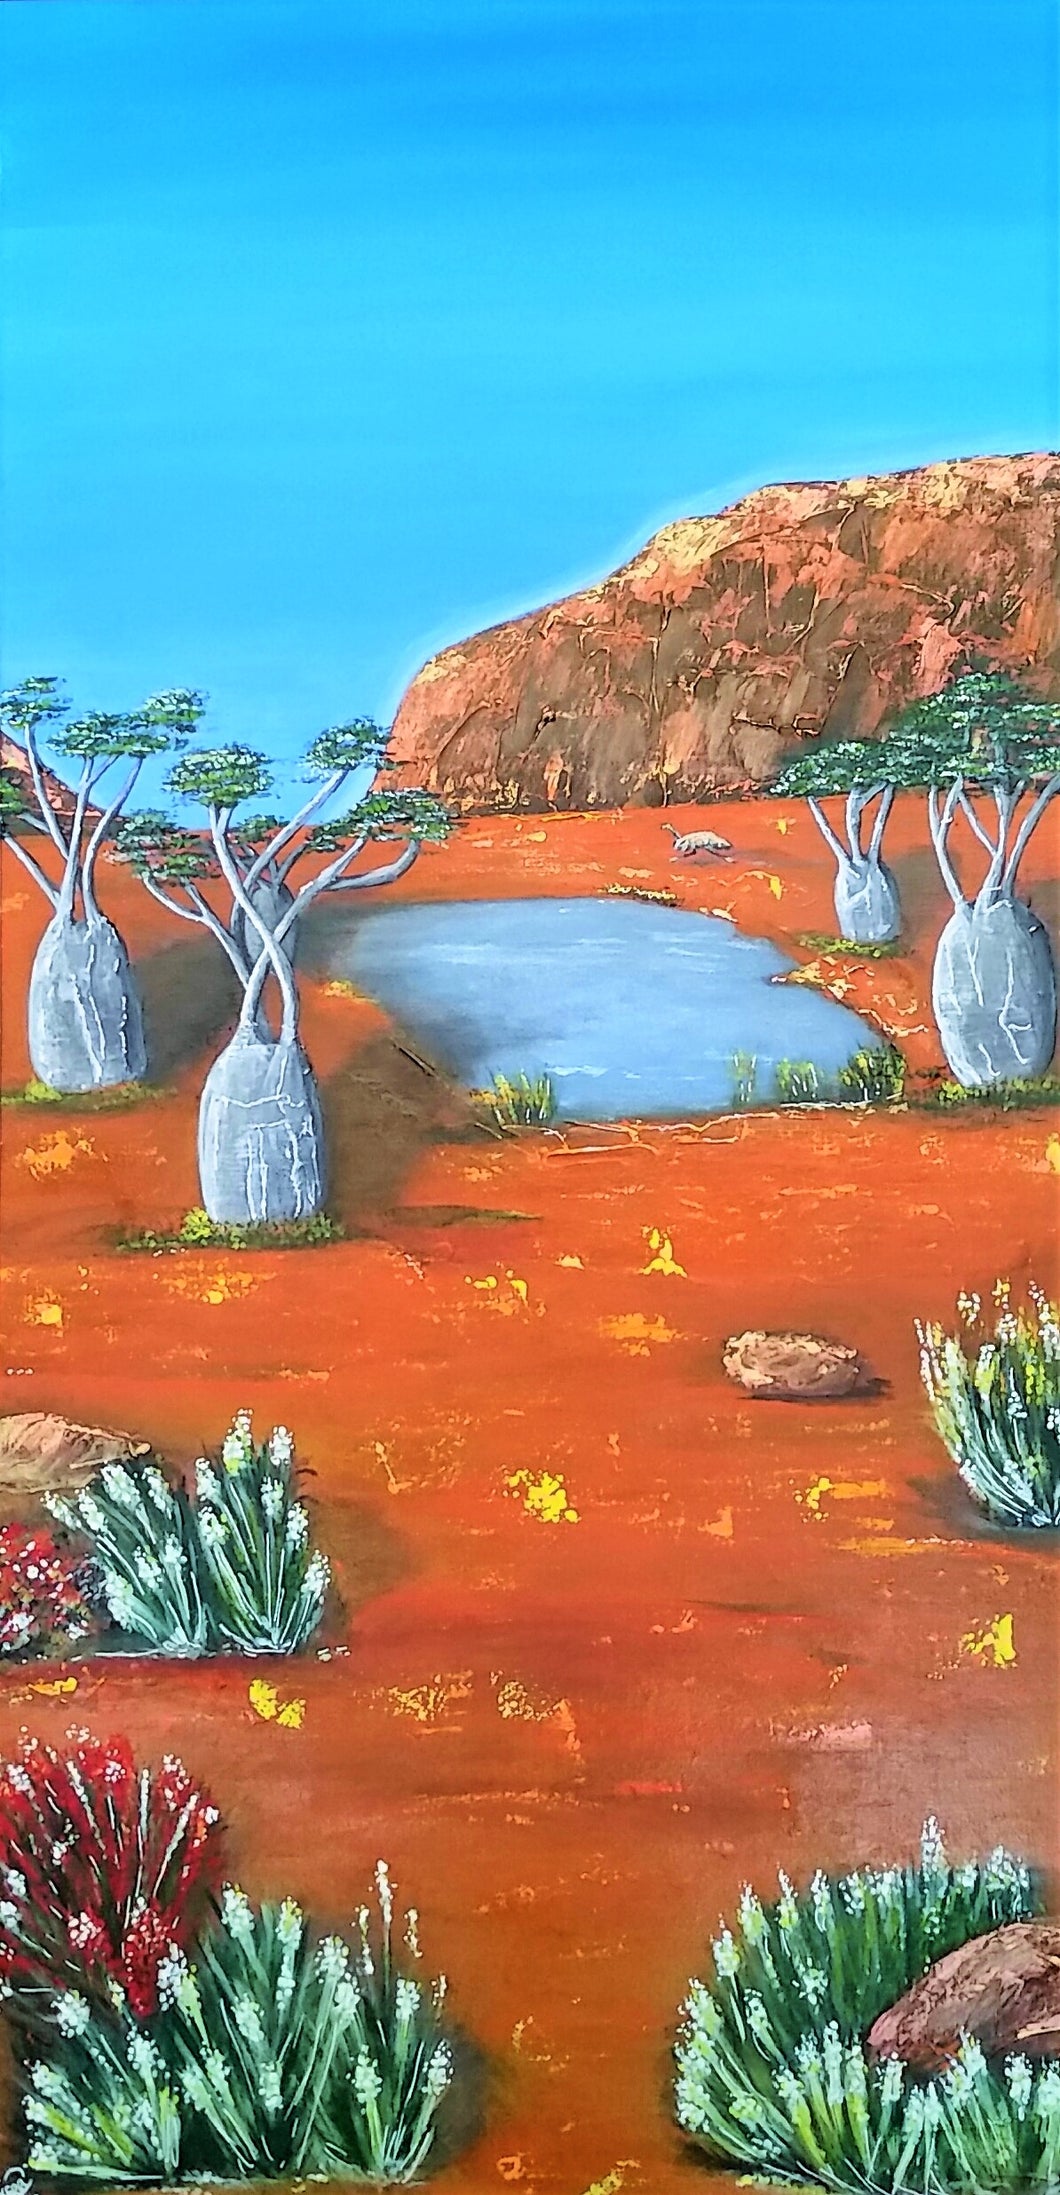 original painting of a of a large rock formation, boab trees, a billabong and emu with beautiful orange and blue complimentary colours inspired by the Kimberley region (Australia's North West outback)